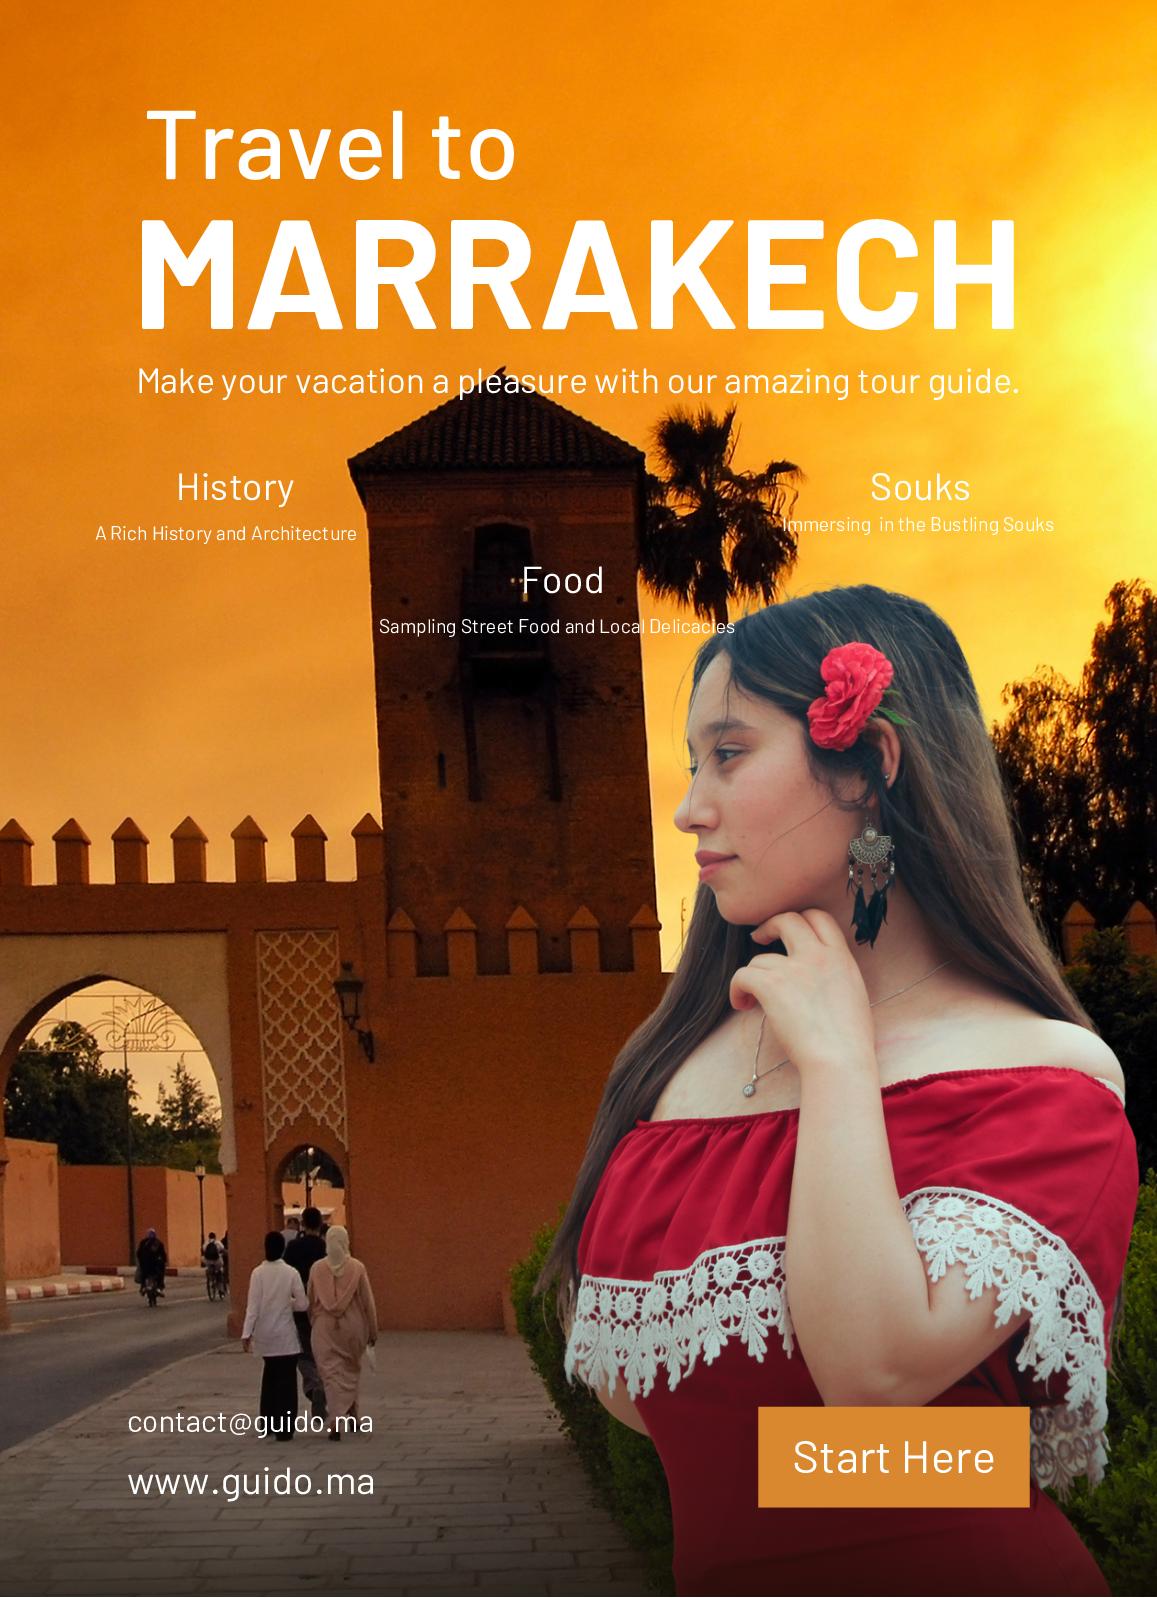 Which famous film was partially shot in Marrakech?